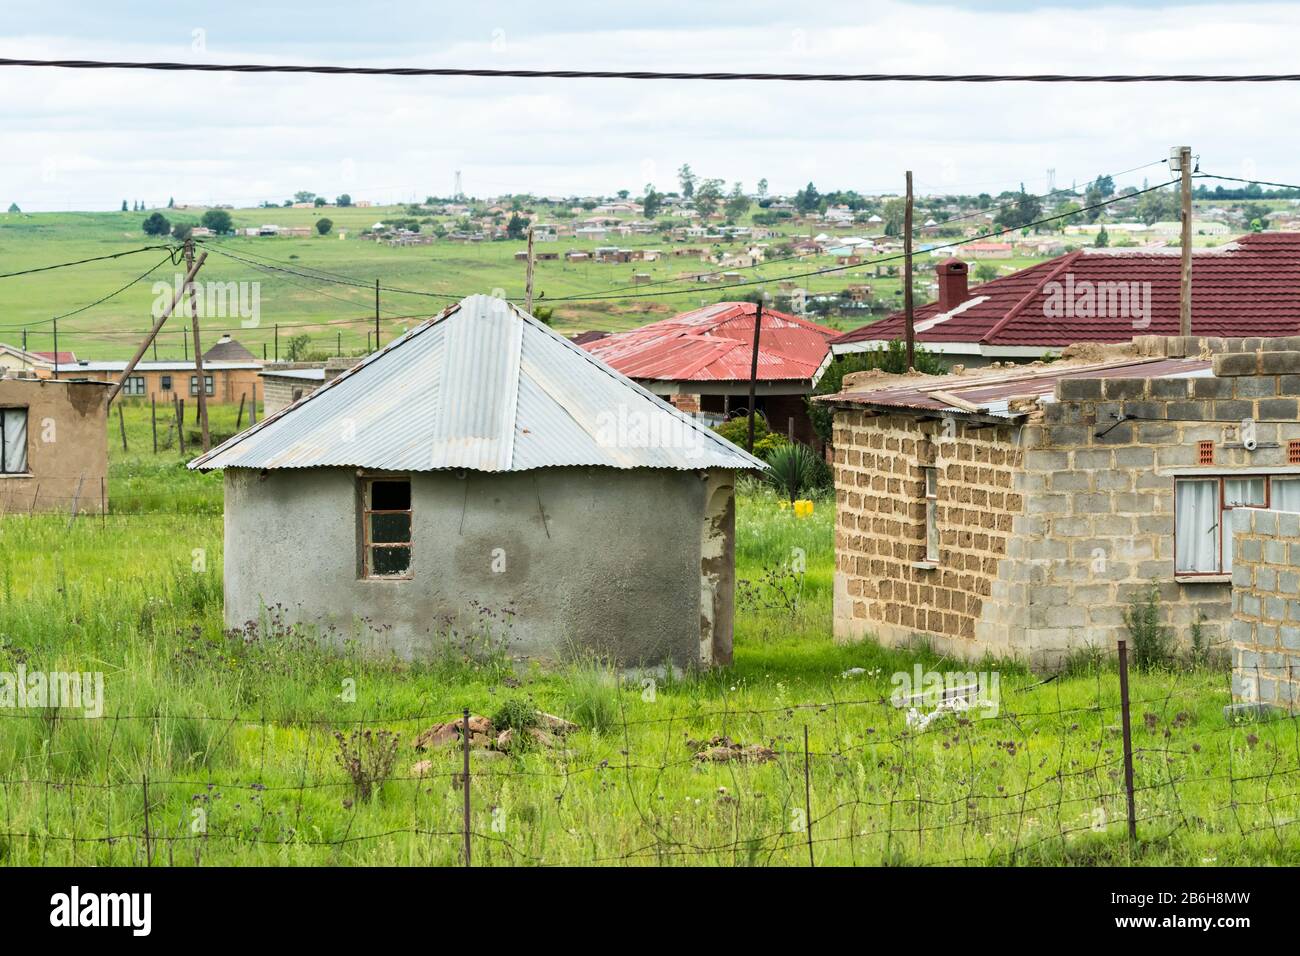 roughly constructed traditional rondawel or circular hut or house in a small rural town in Kwazulu Natal, South Africa Stock Photo